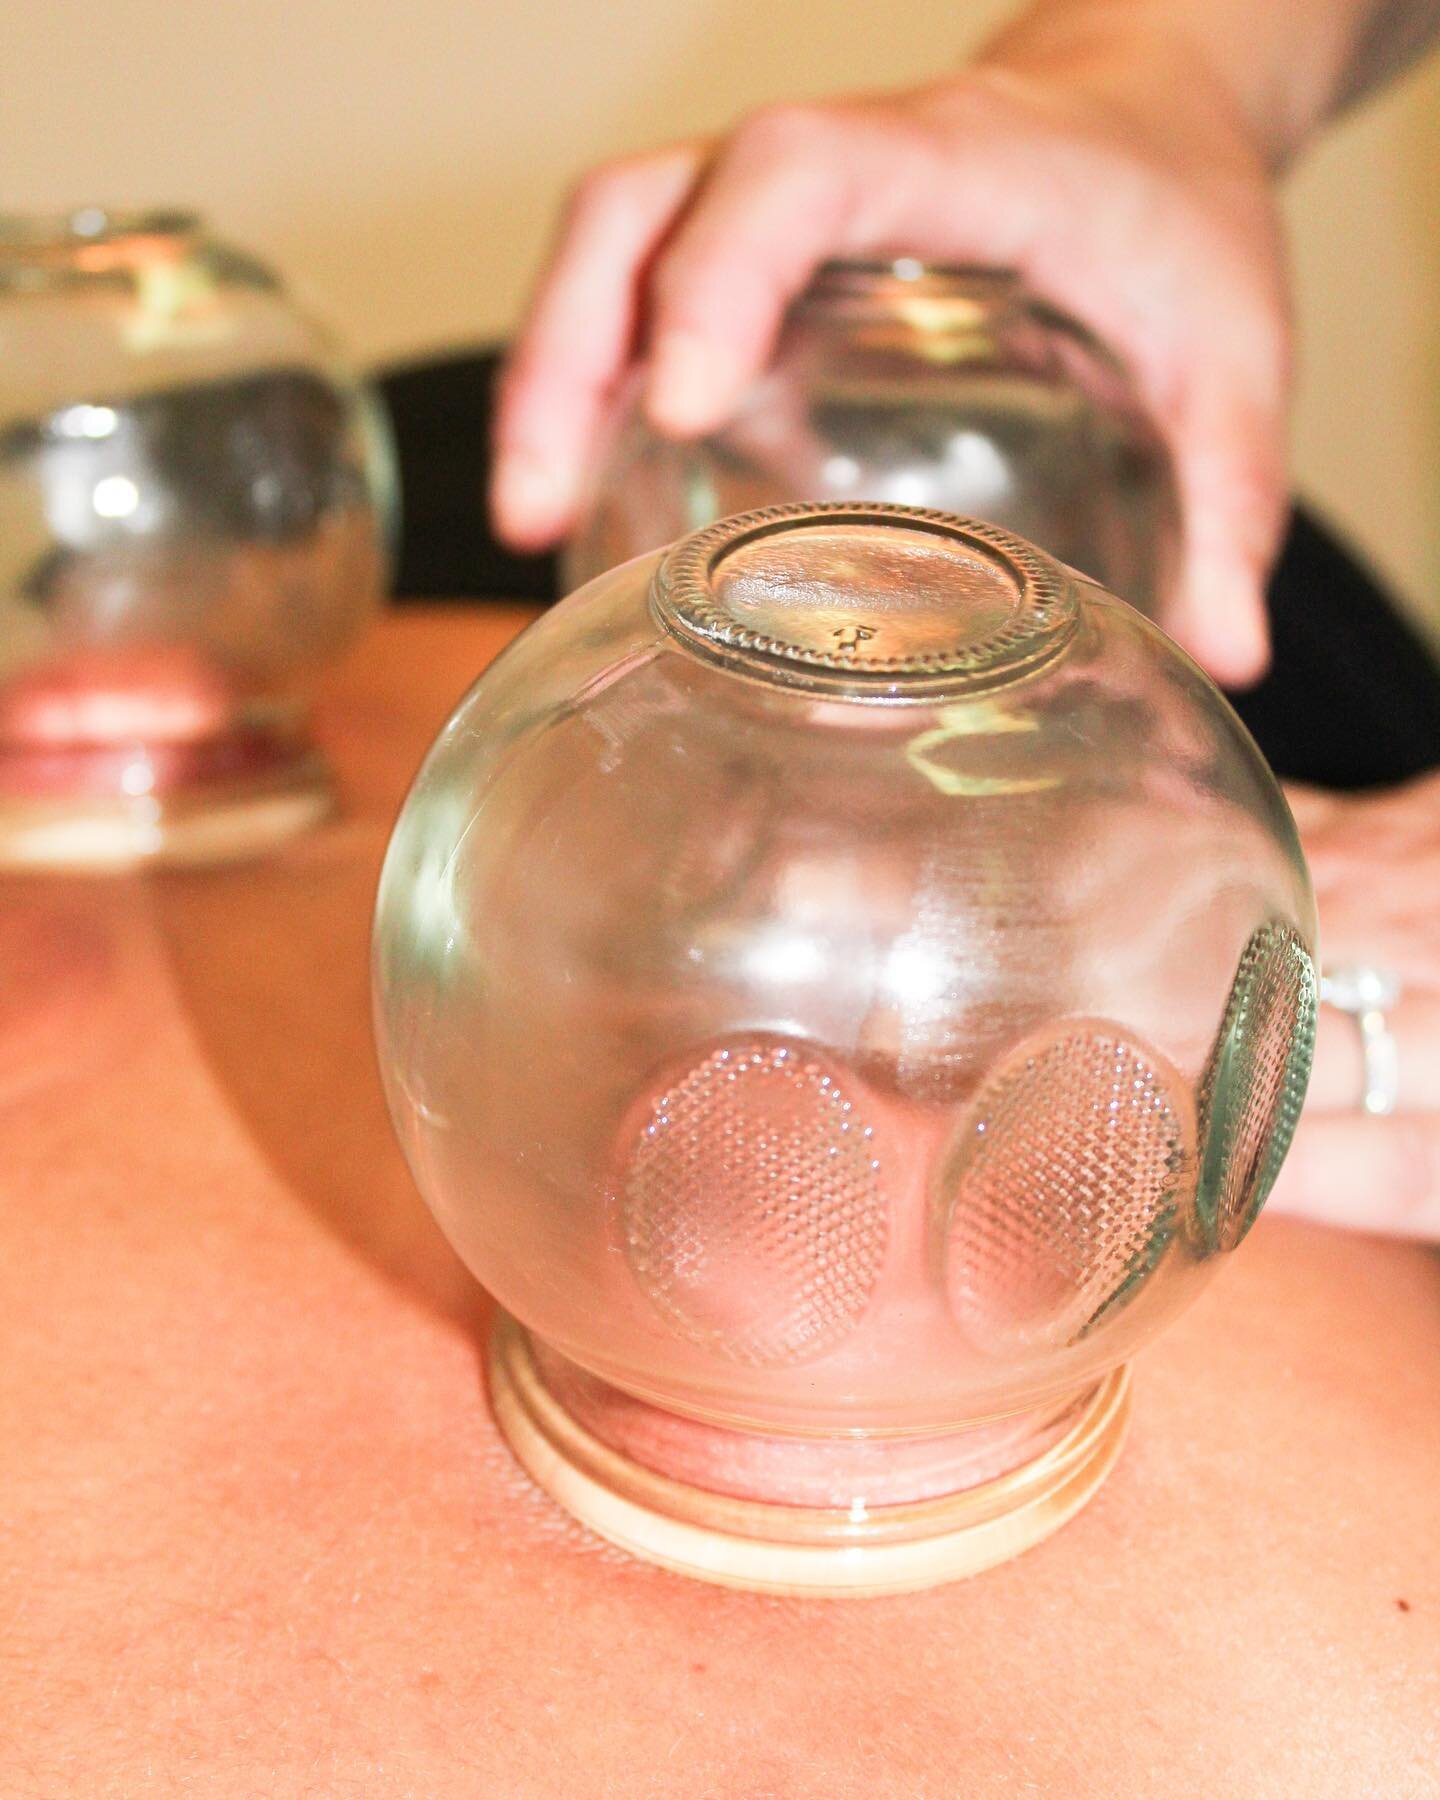 Cupping + chiro, a healing match that recalibrates, relaxes, and realigns 💆🏽&zwj;♀️

I included fire cupping into my sessions to address muscular tightness but what resulted was so much more. Fire cupping relaxes muscle tissues, brings blood to the